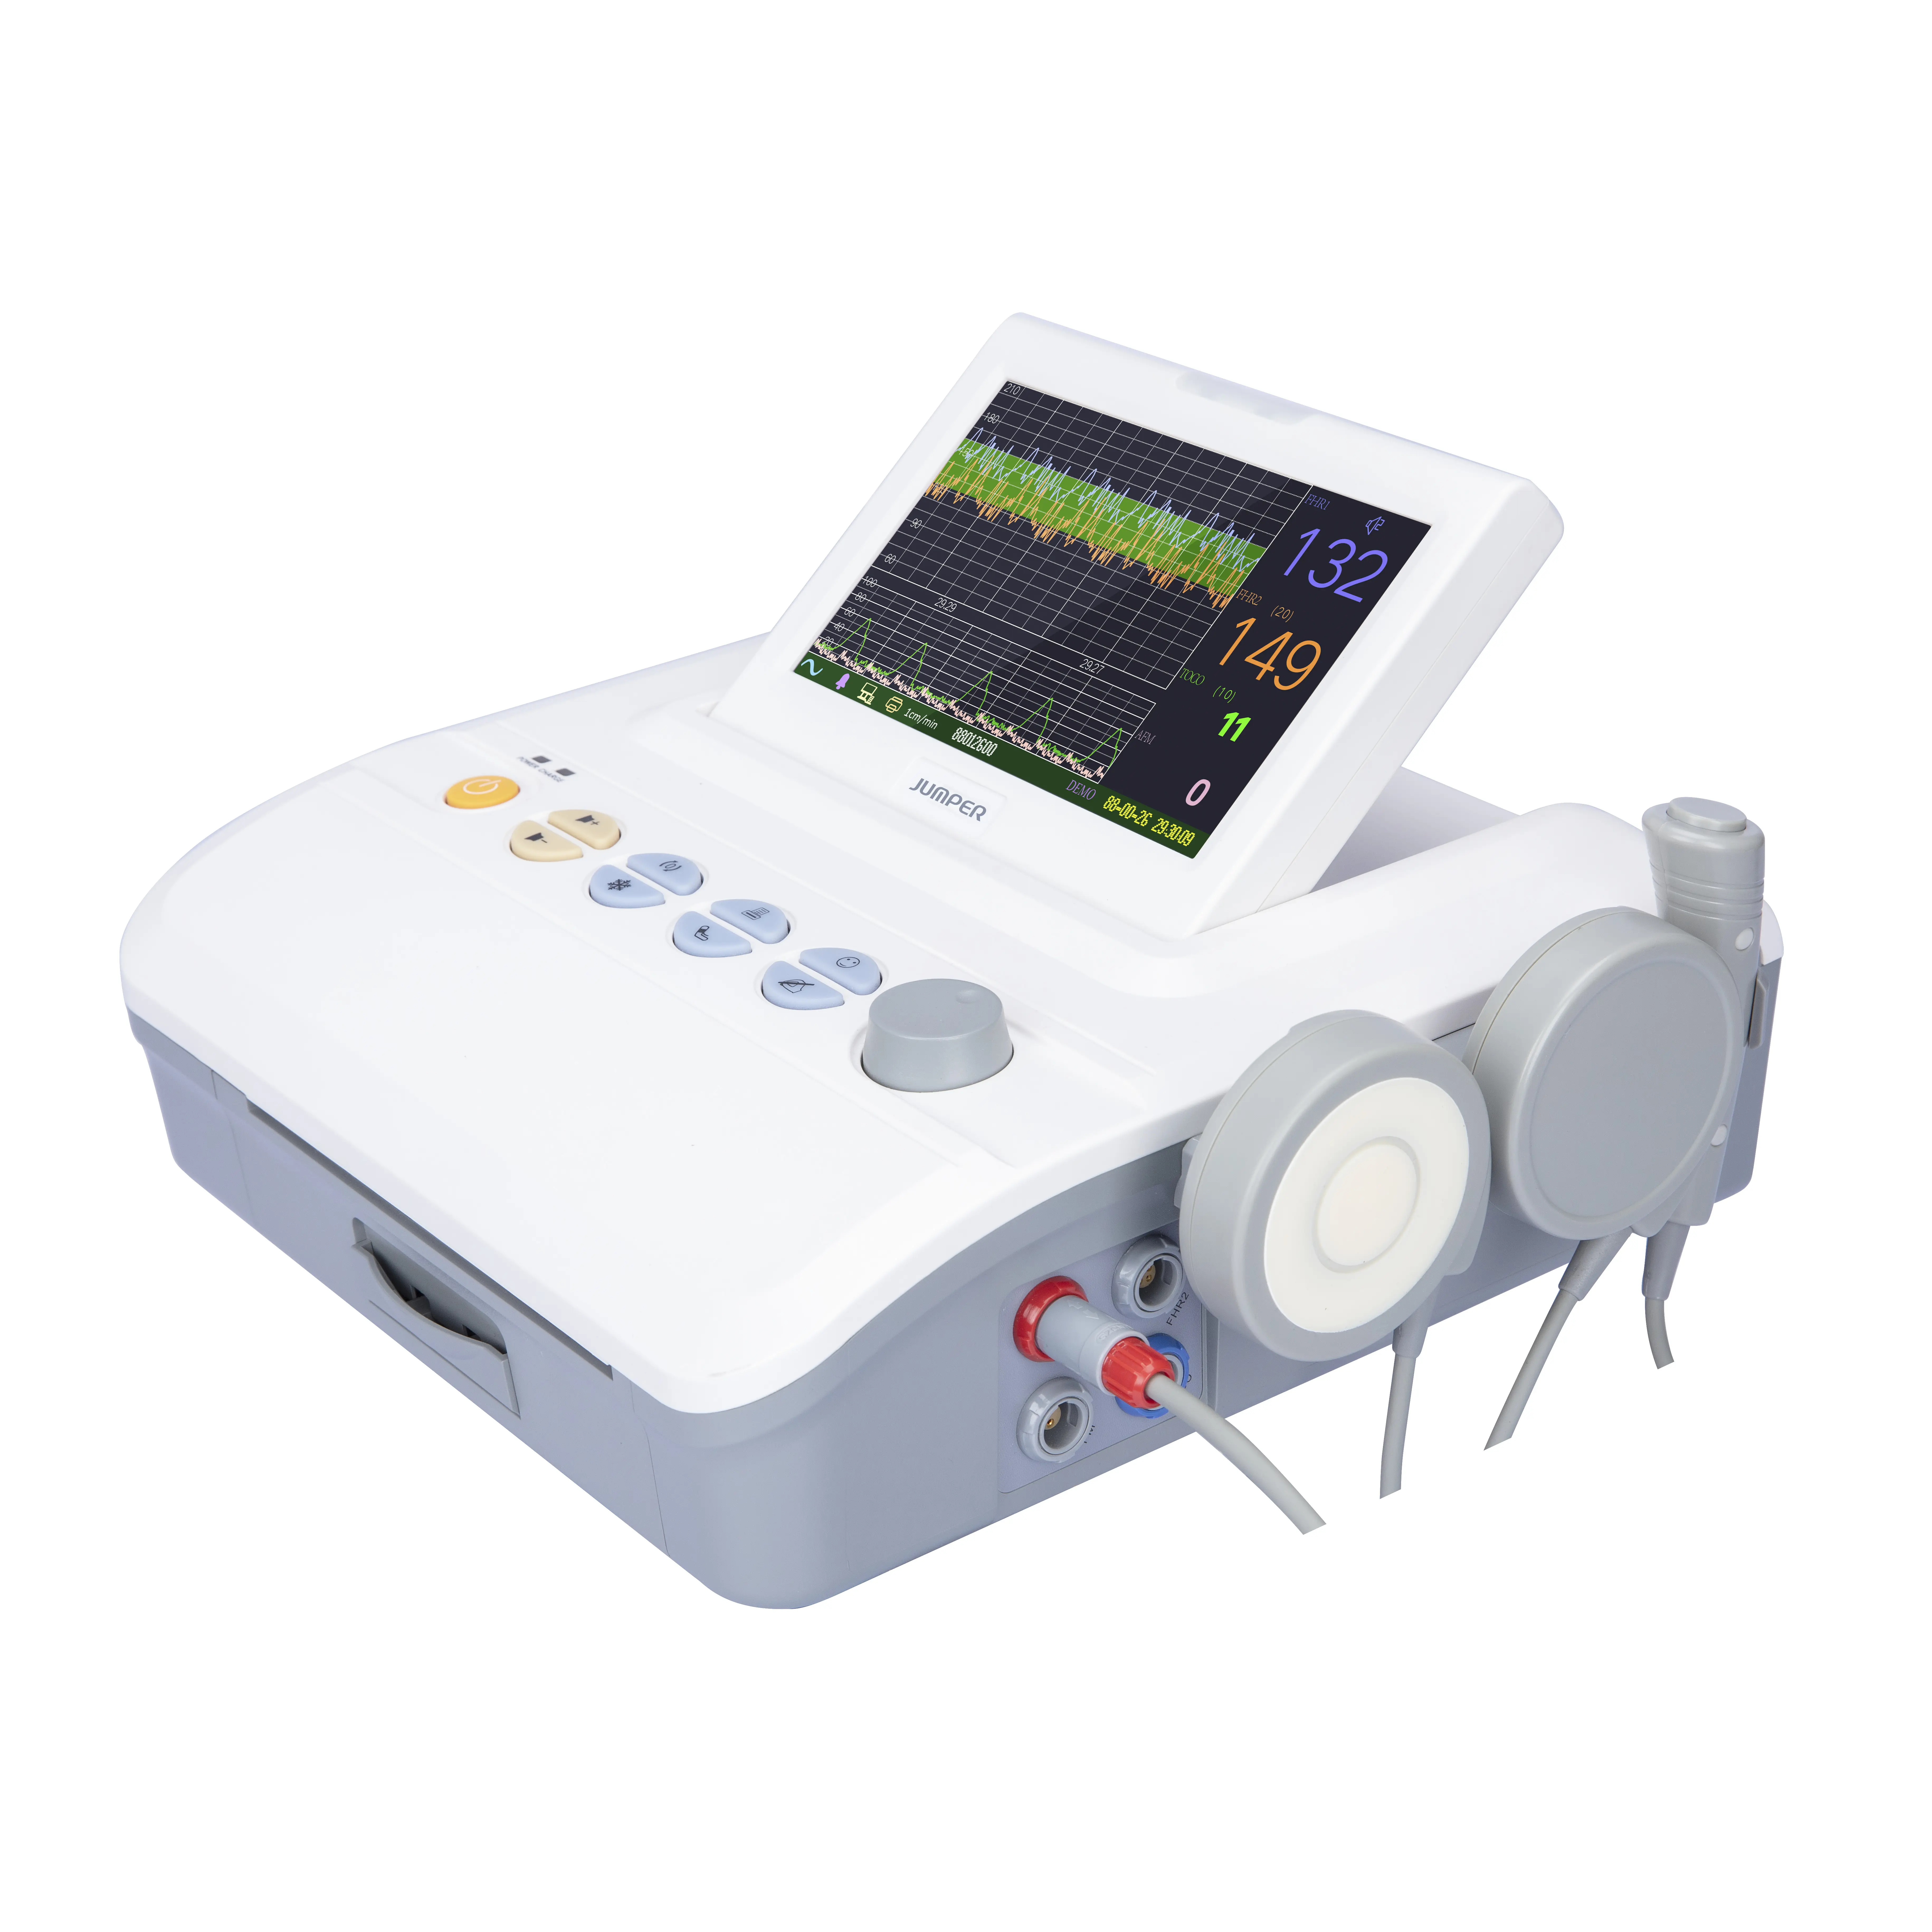 JUMPER JPD-300P Cheap Price 7 inch Screen Hospital Pregnant Women Cardiotocography Machine Maternal Baby Heartbeat Fetal Monitor